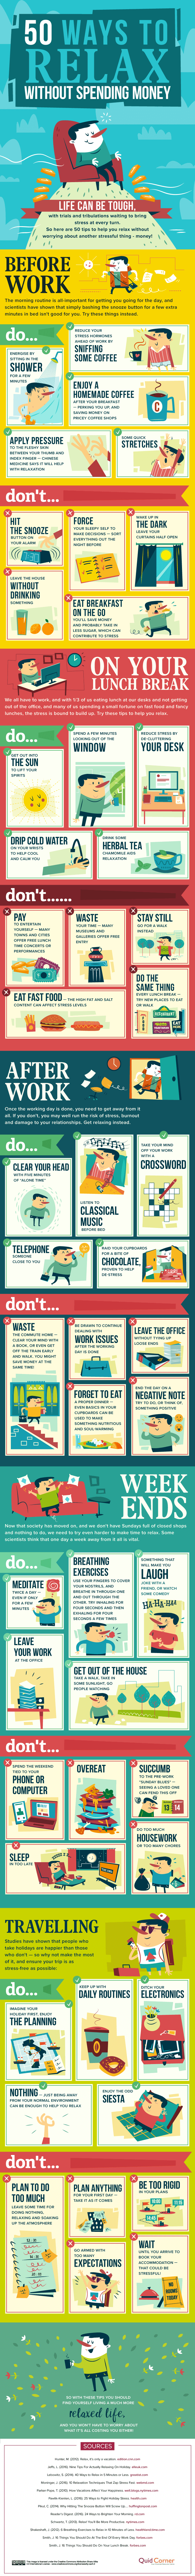 50 Ways to Relax Without Spending Money [infographic]